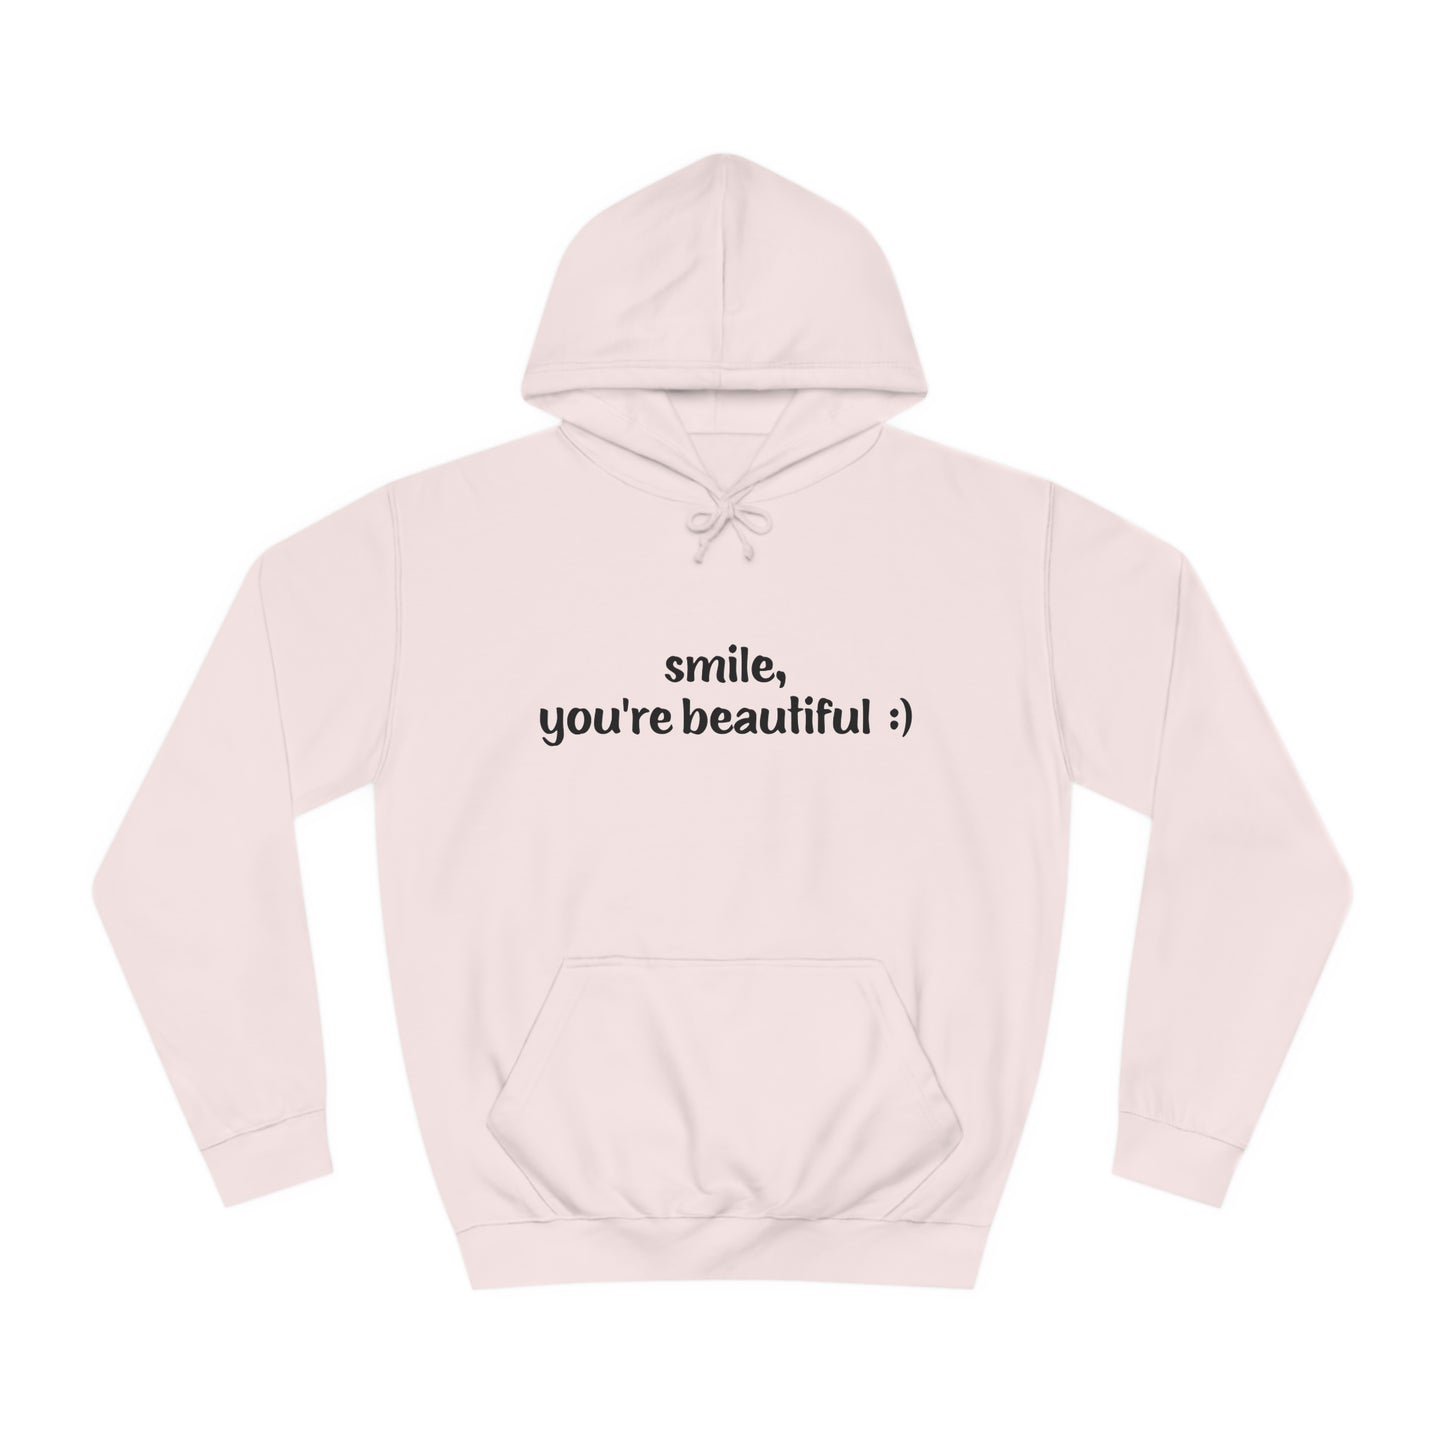 smile, you're beautiful :) | unisex casual hoodie